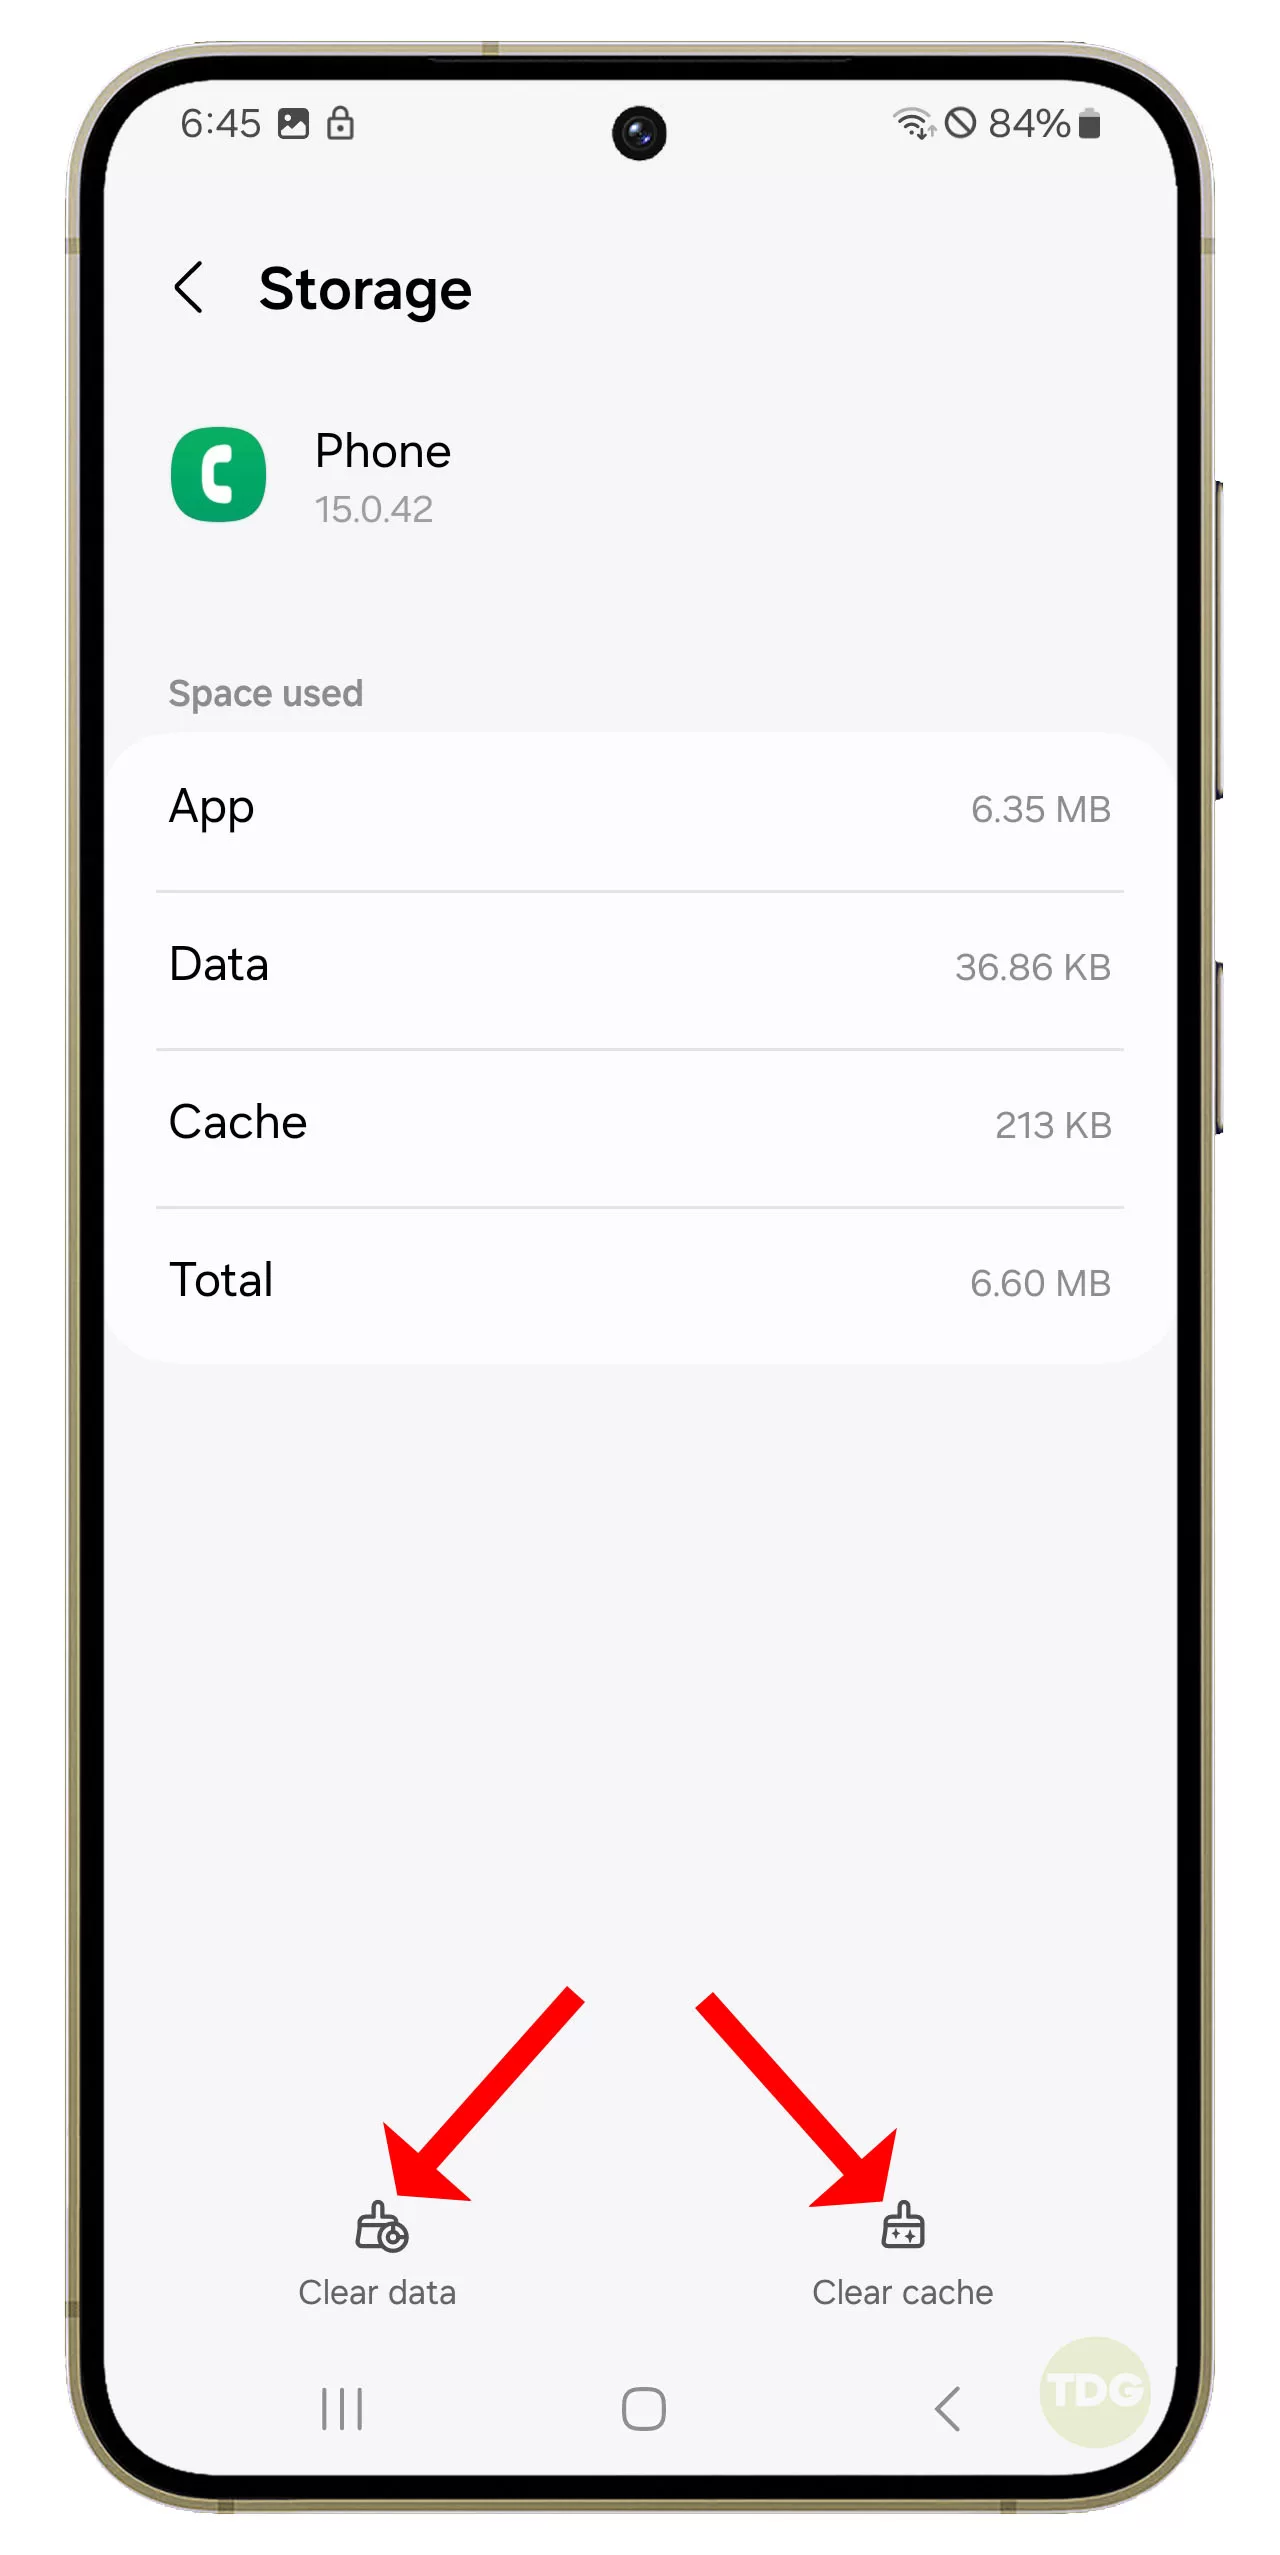 Tap Clear cache, then Clear data.